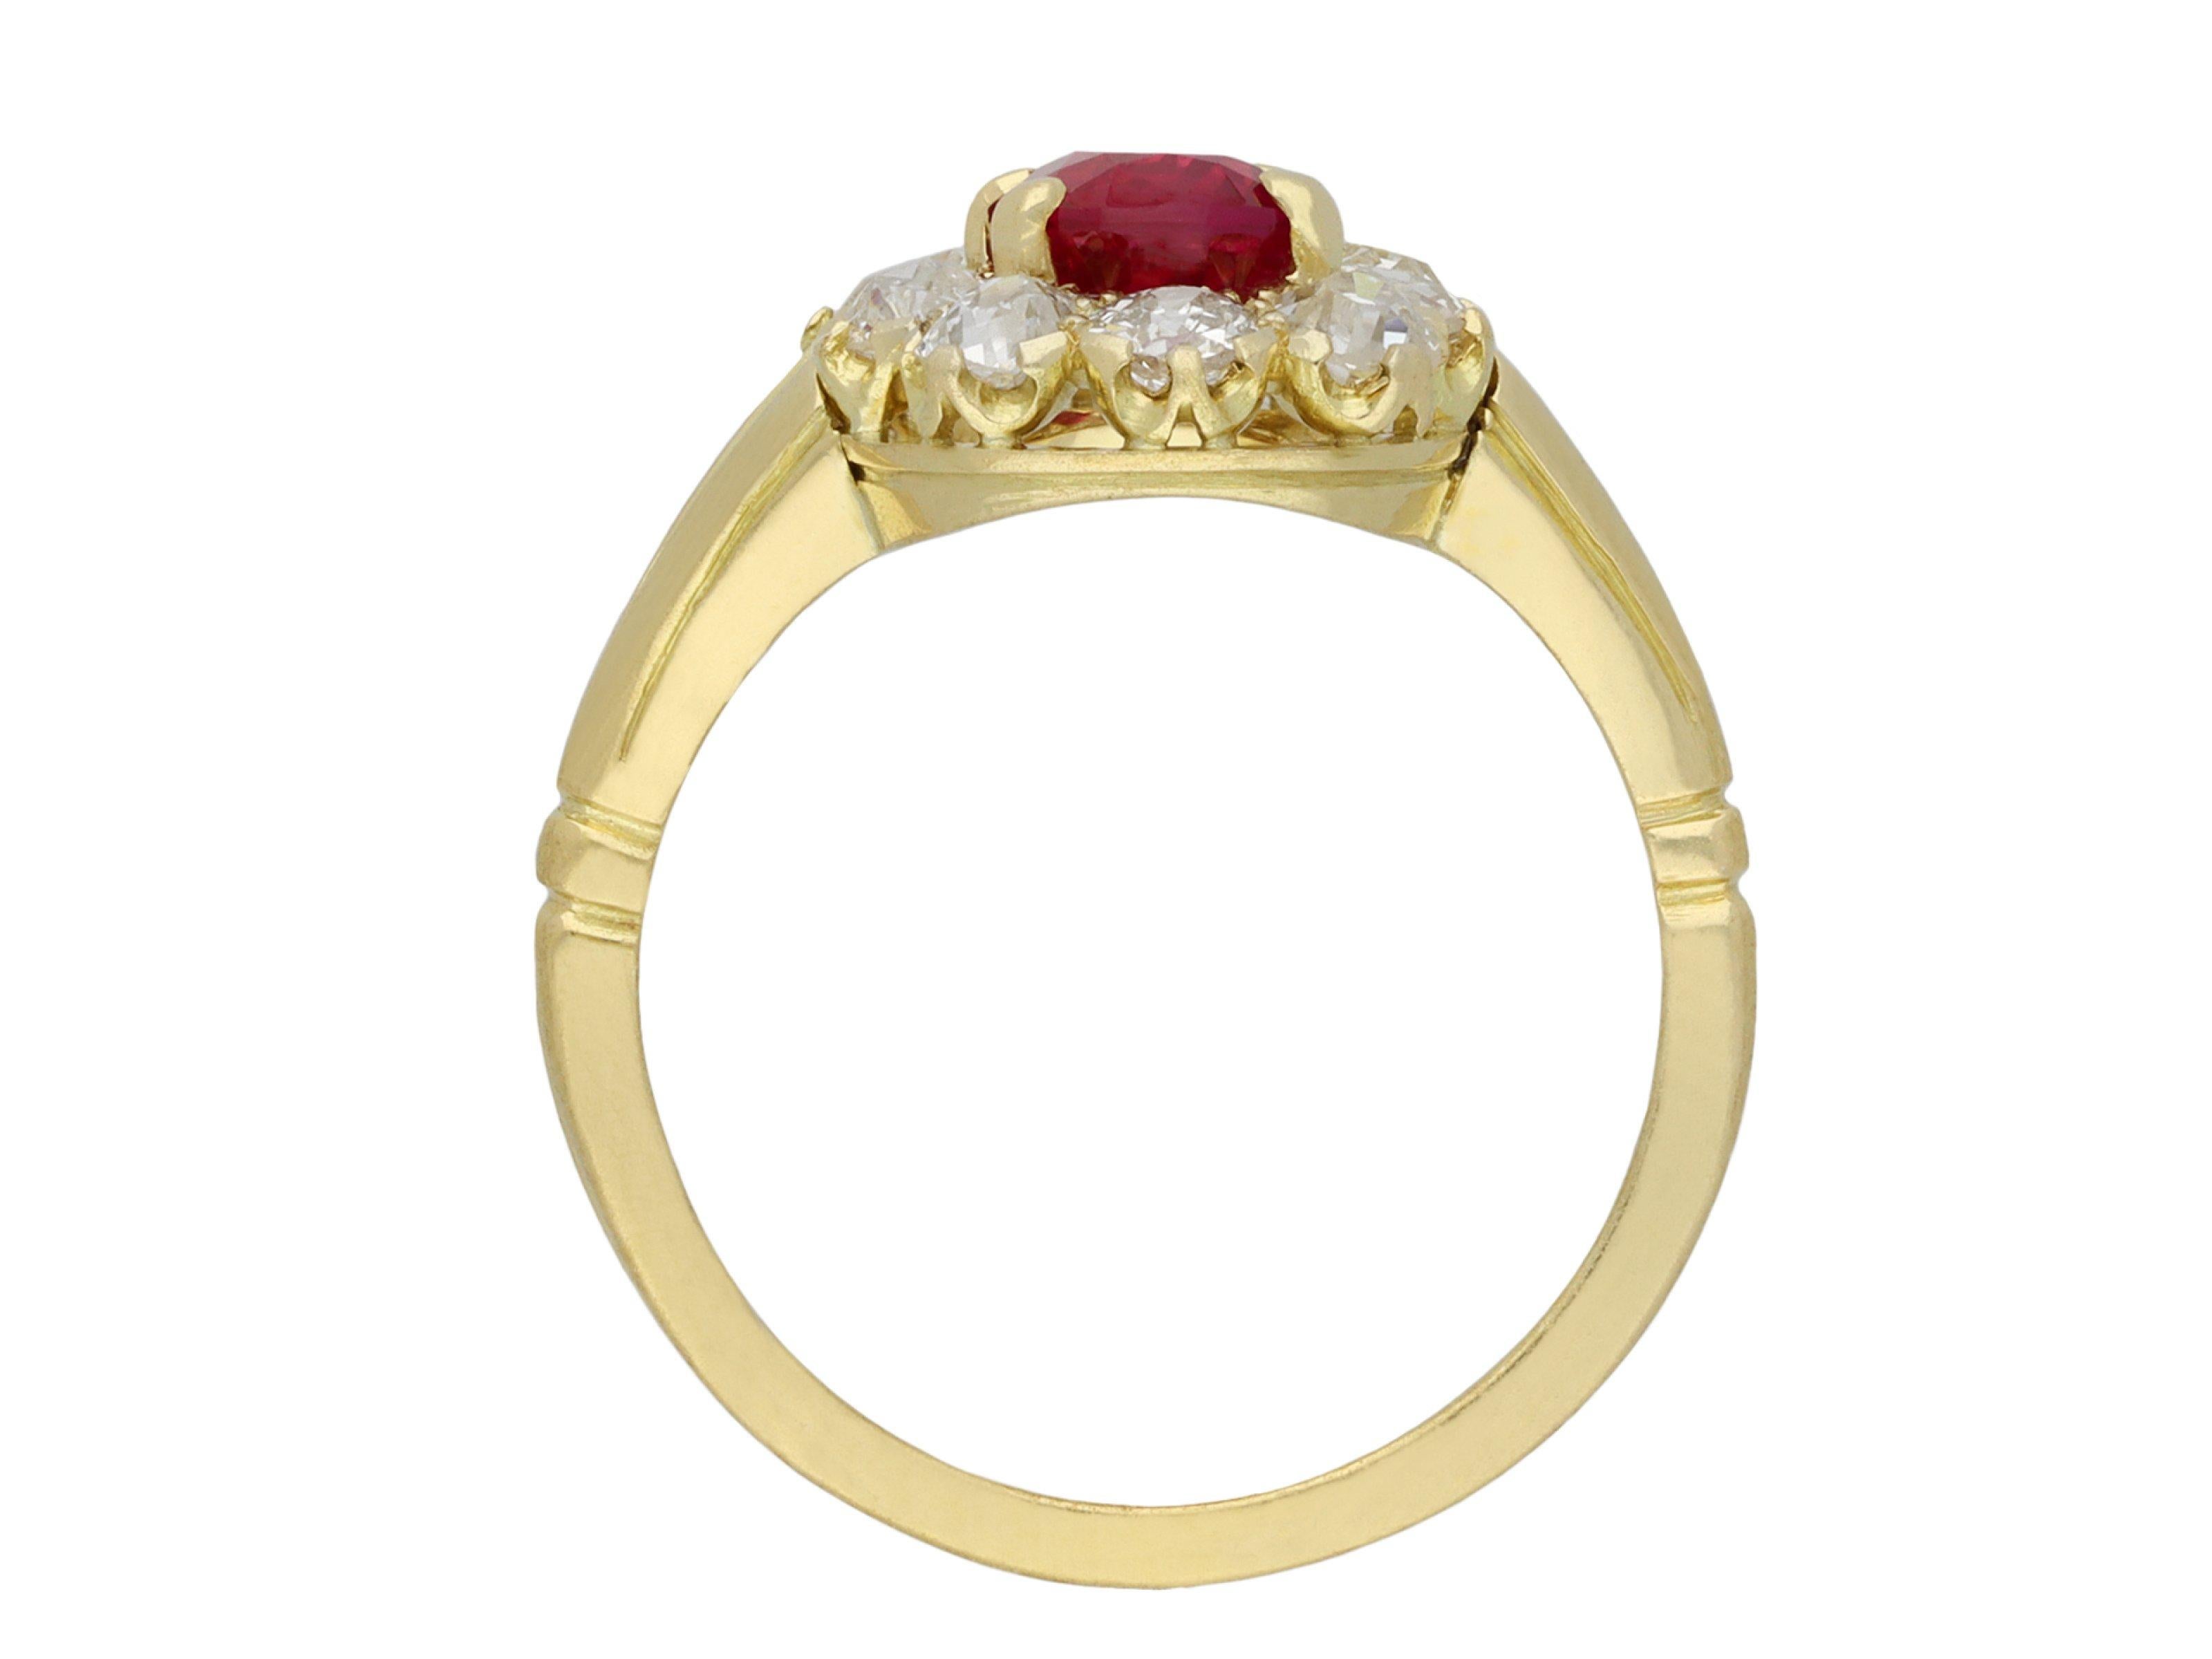 Victorian Burmese ruby and diamond coronet cluster ring. Set to centre with an oval old cut natural unenhanced Burmese ruby in an open back claw setting with a weight of 1.32 carats, enircled by ten cushion shape old mine diamonds in open back claw